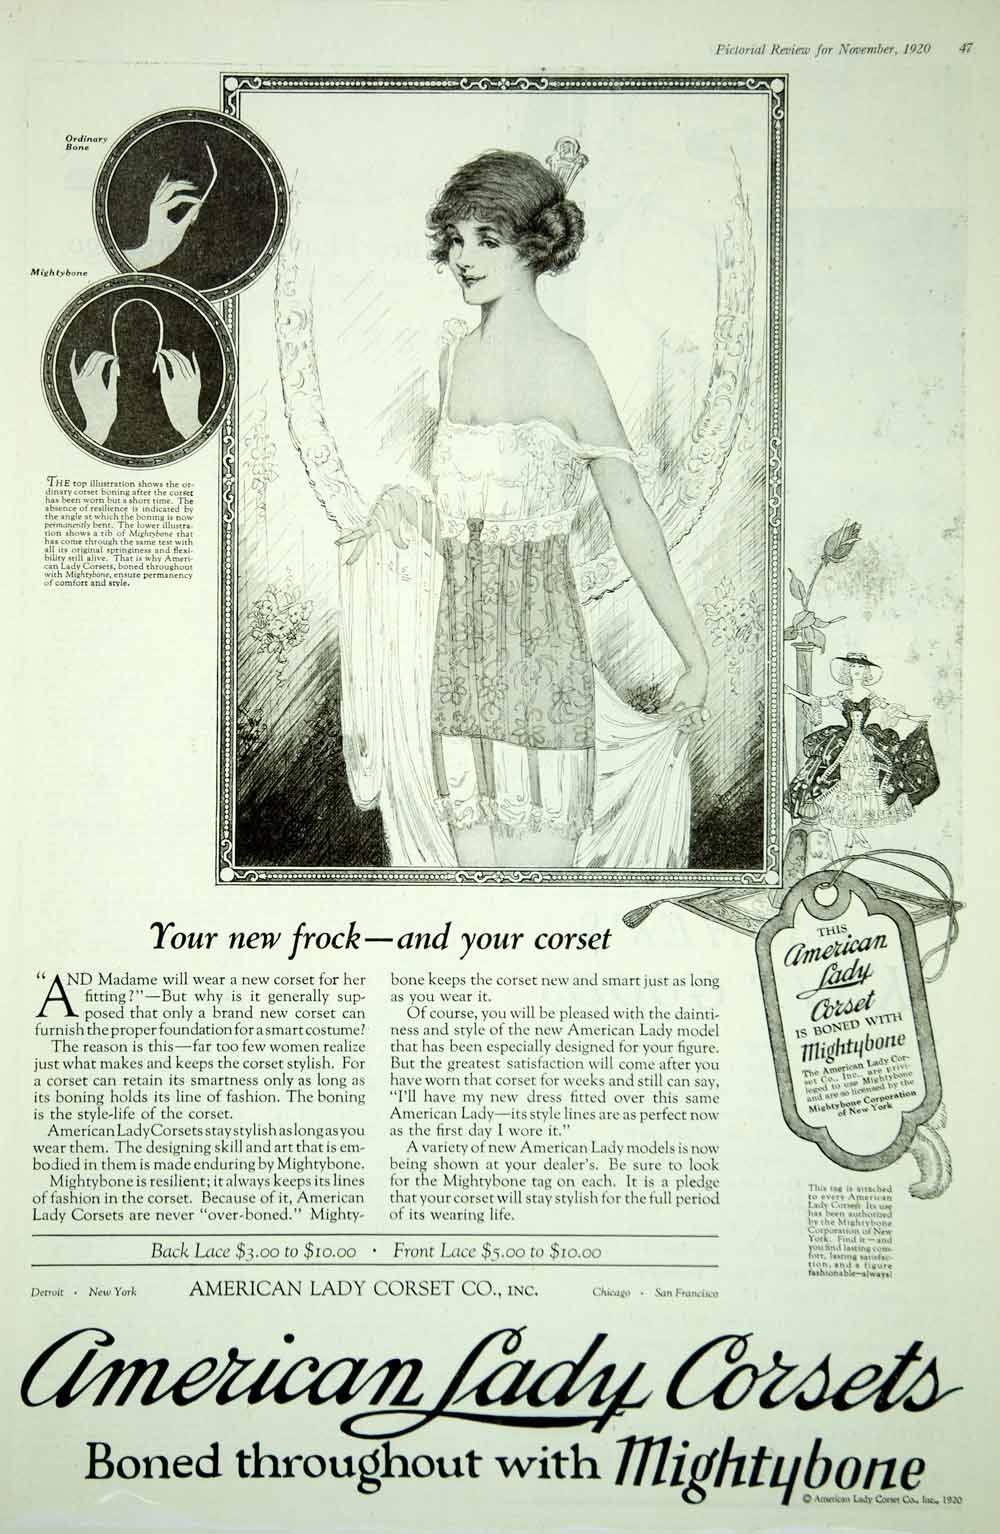 Original 1920s period vintage advertisement print from English magazine  advertising EMPIRE CORSETS for ladies Stock Photo - Alamy